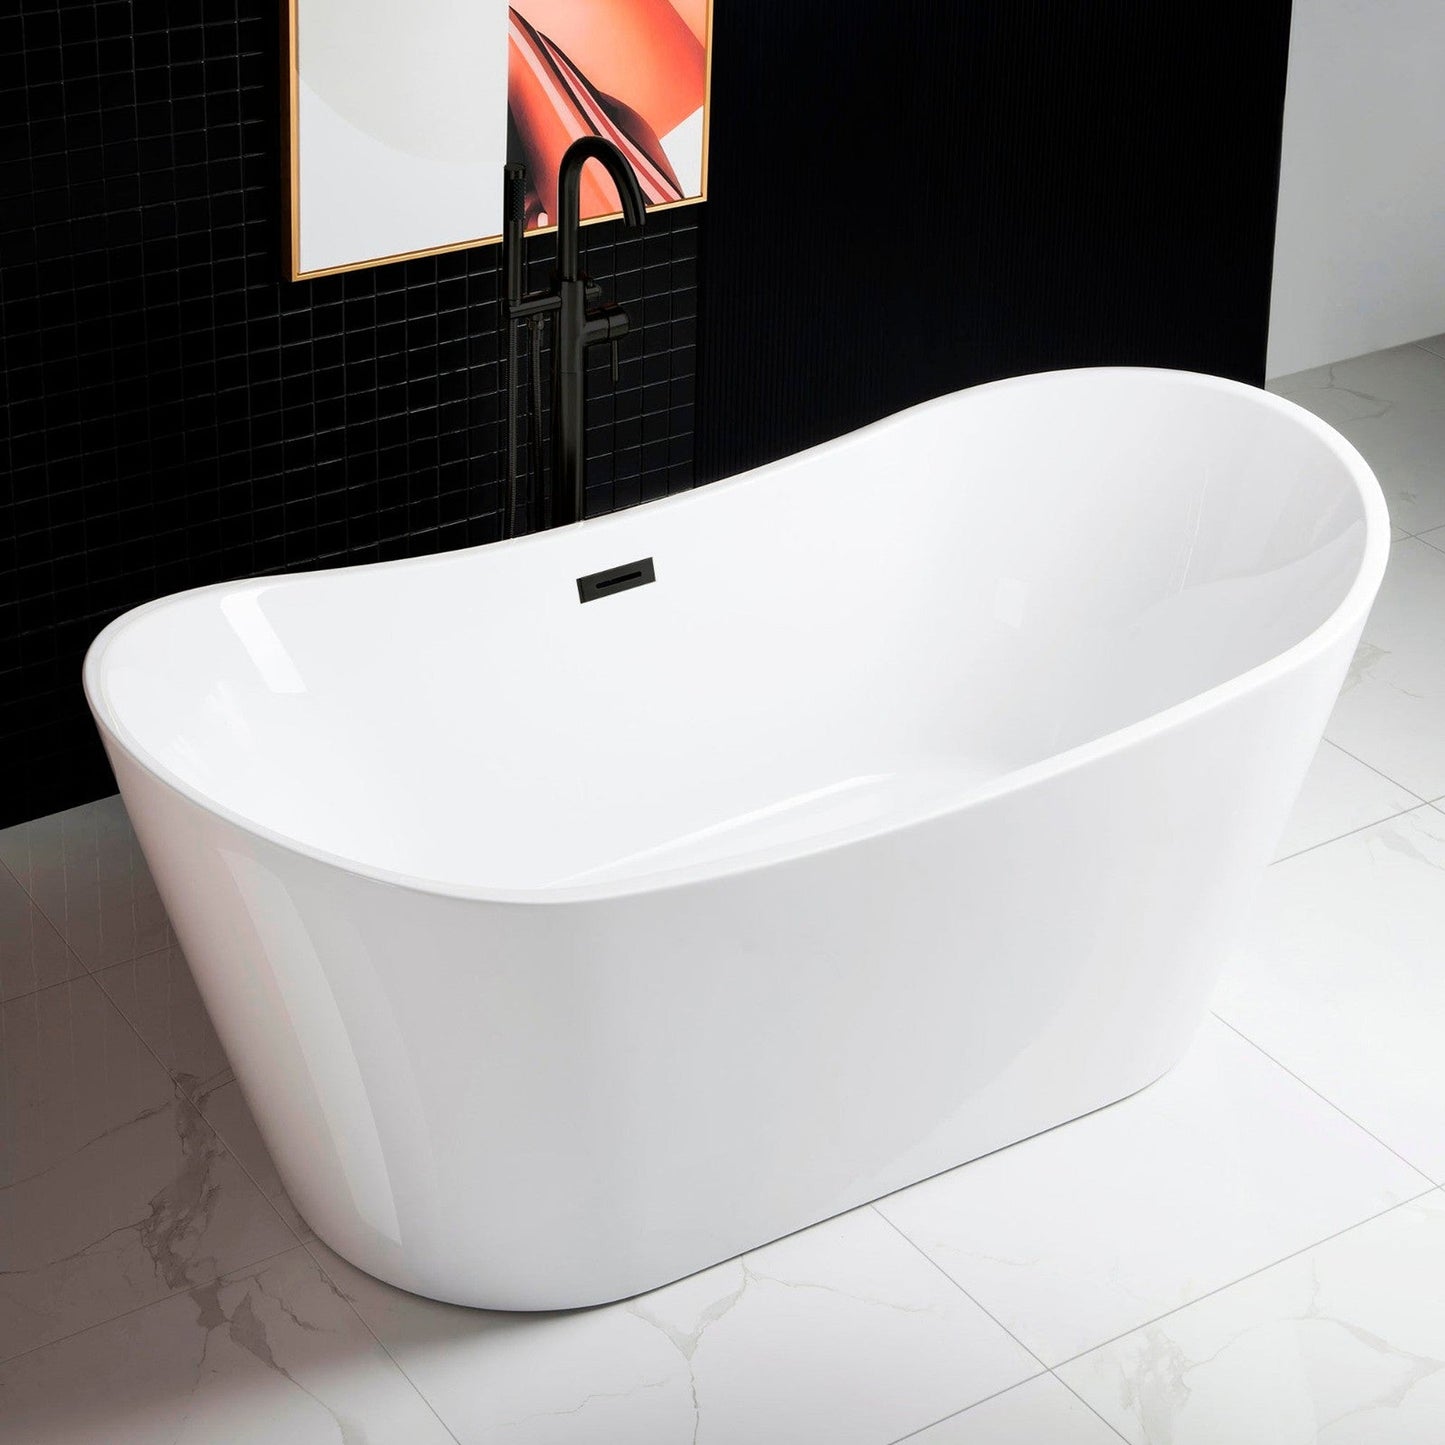 WoodBridge B0010 67" White Acrylic Freestanding Contemporary Soaking Bathtub With Matte Black Drain, Overflow, F-0015 Tub Filler and Caddy Tray